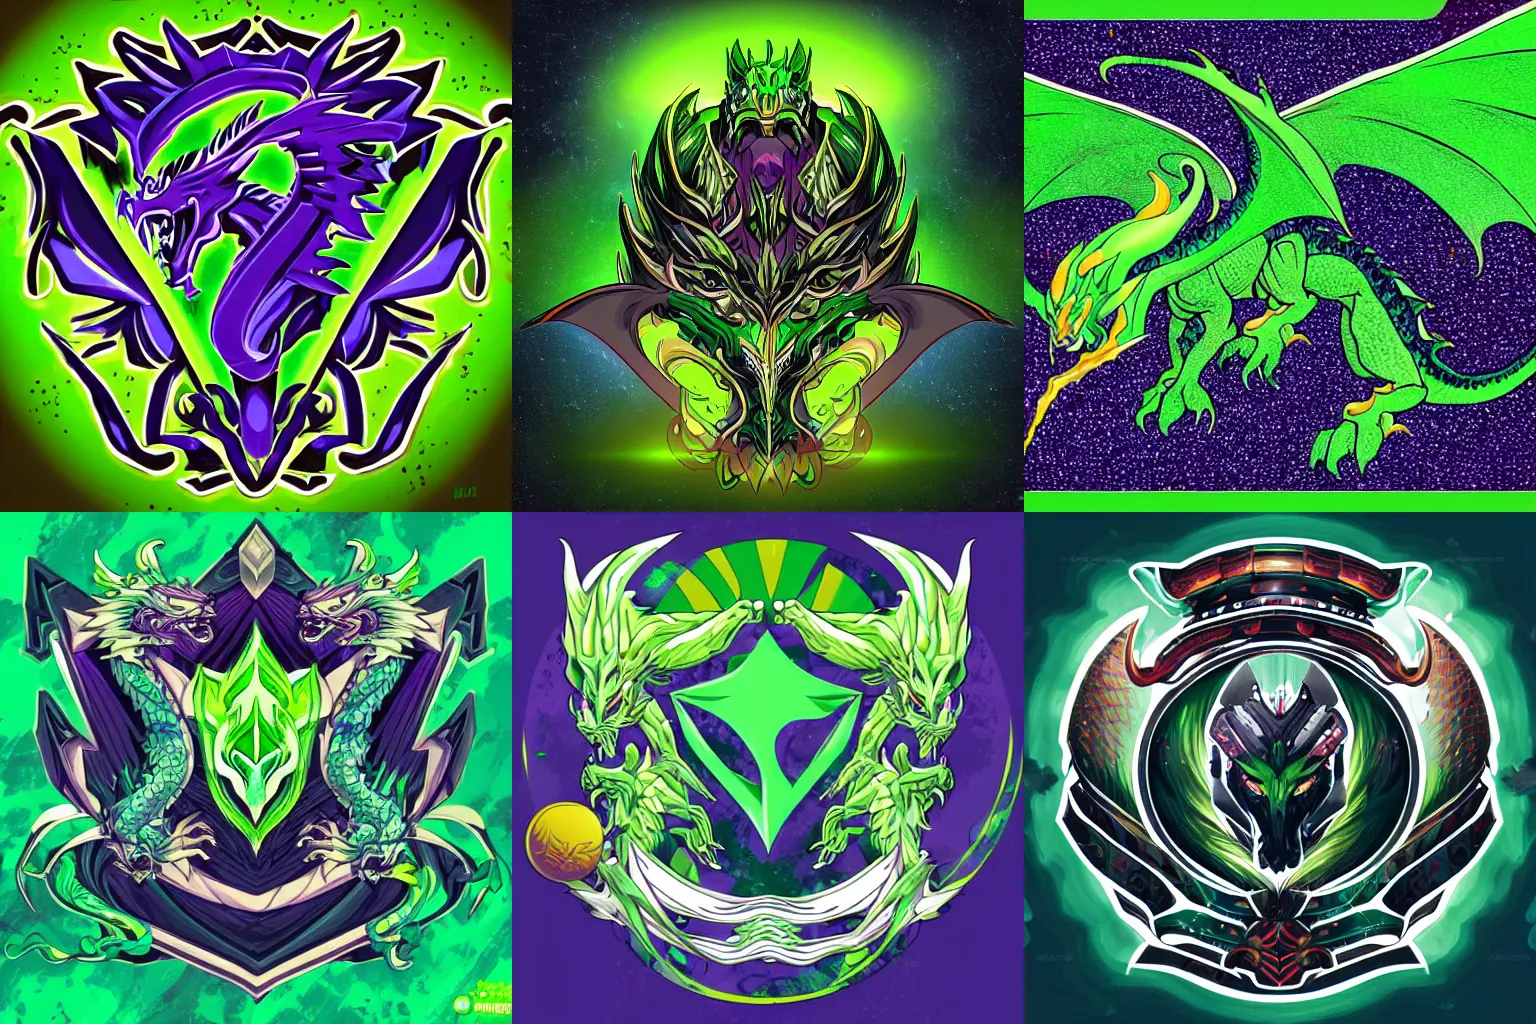 Prompt: A serious-looking green dragon wearing knight aromor, the background is inspired by two colliding galaxies, e-sports logo vector